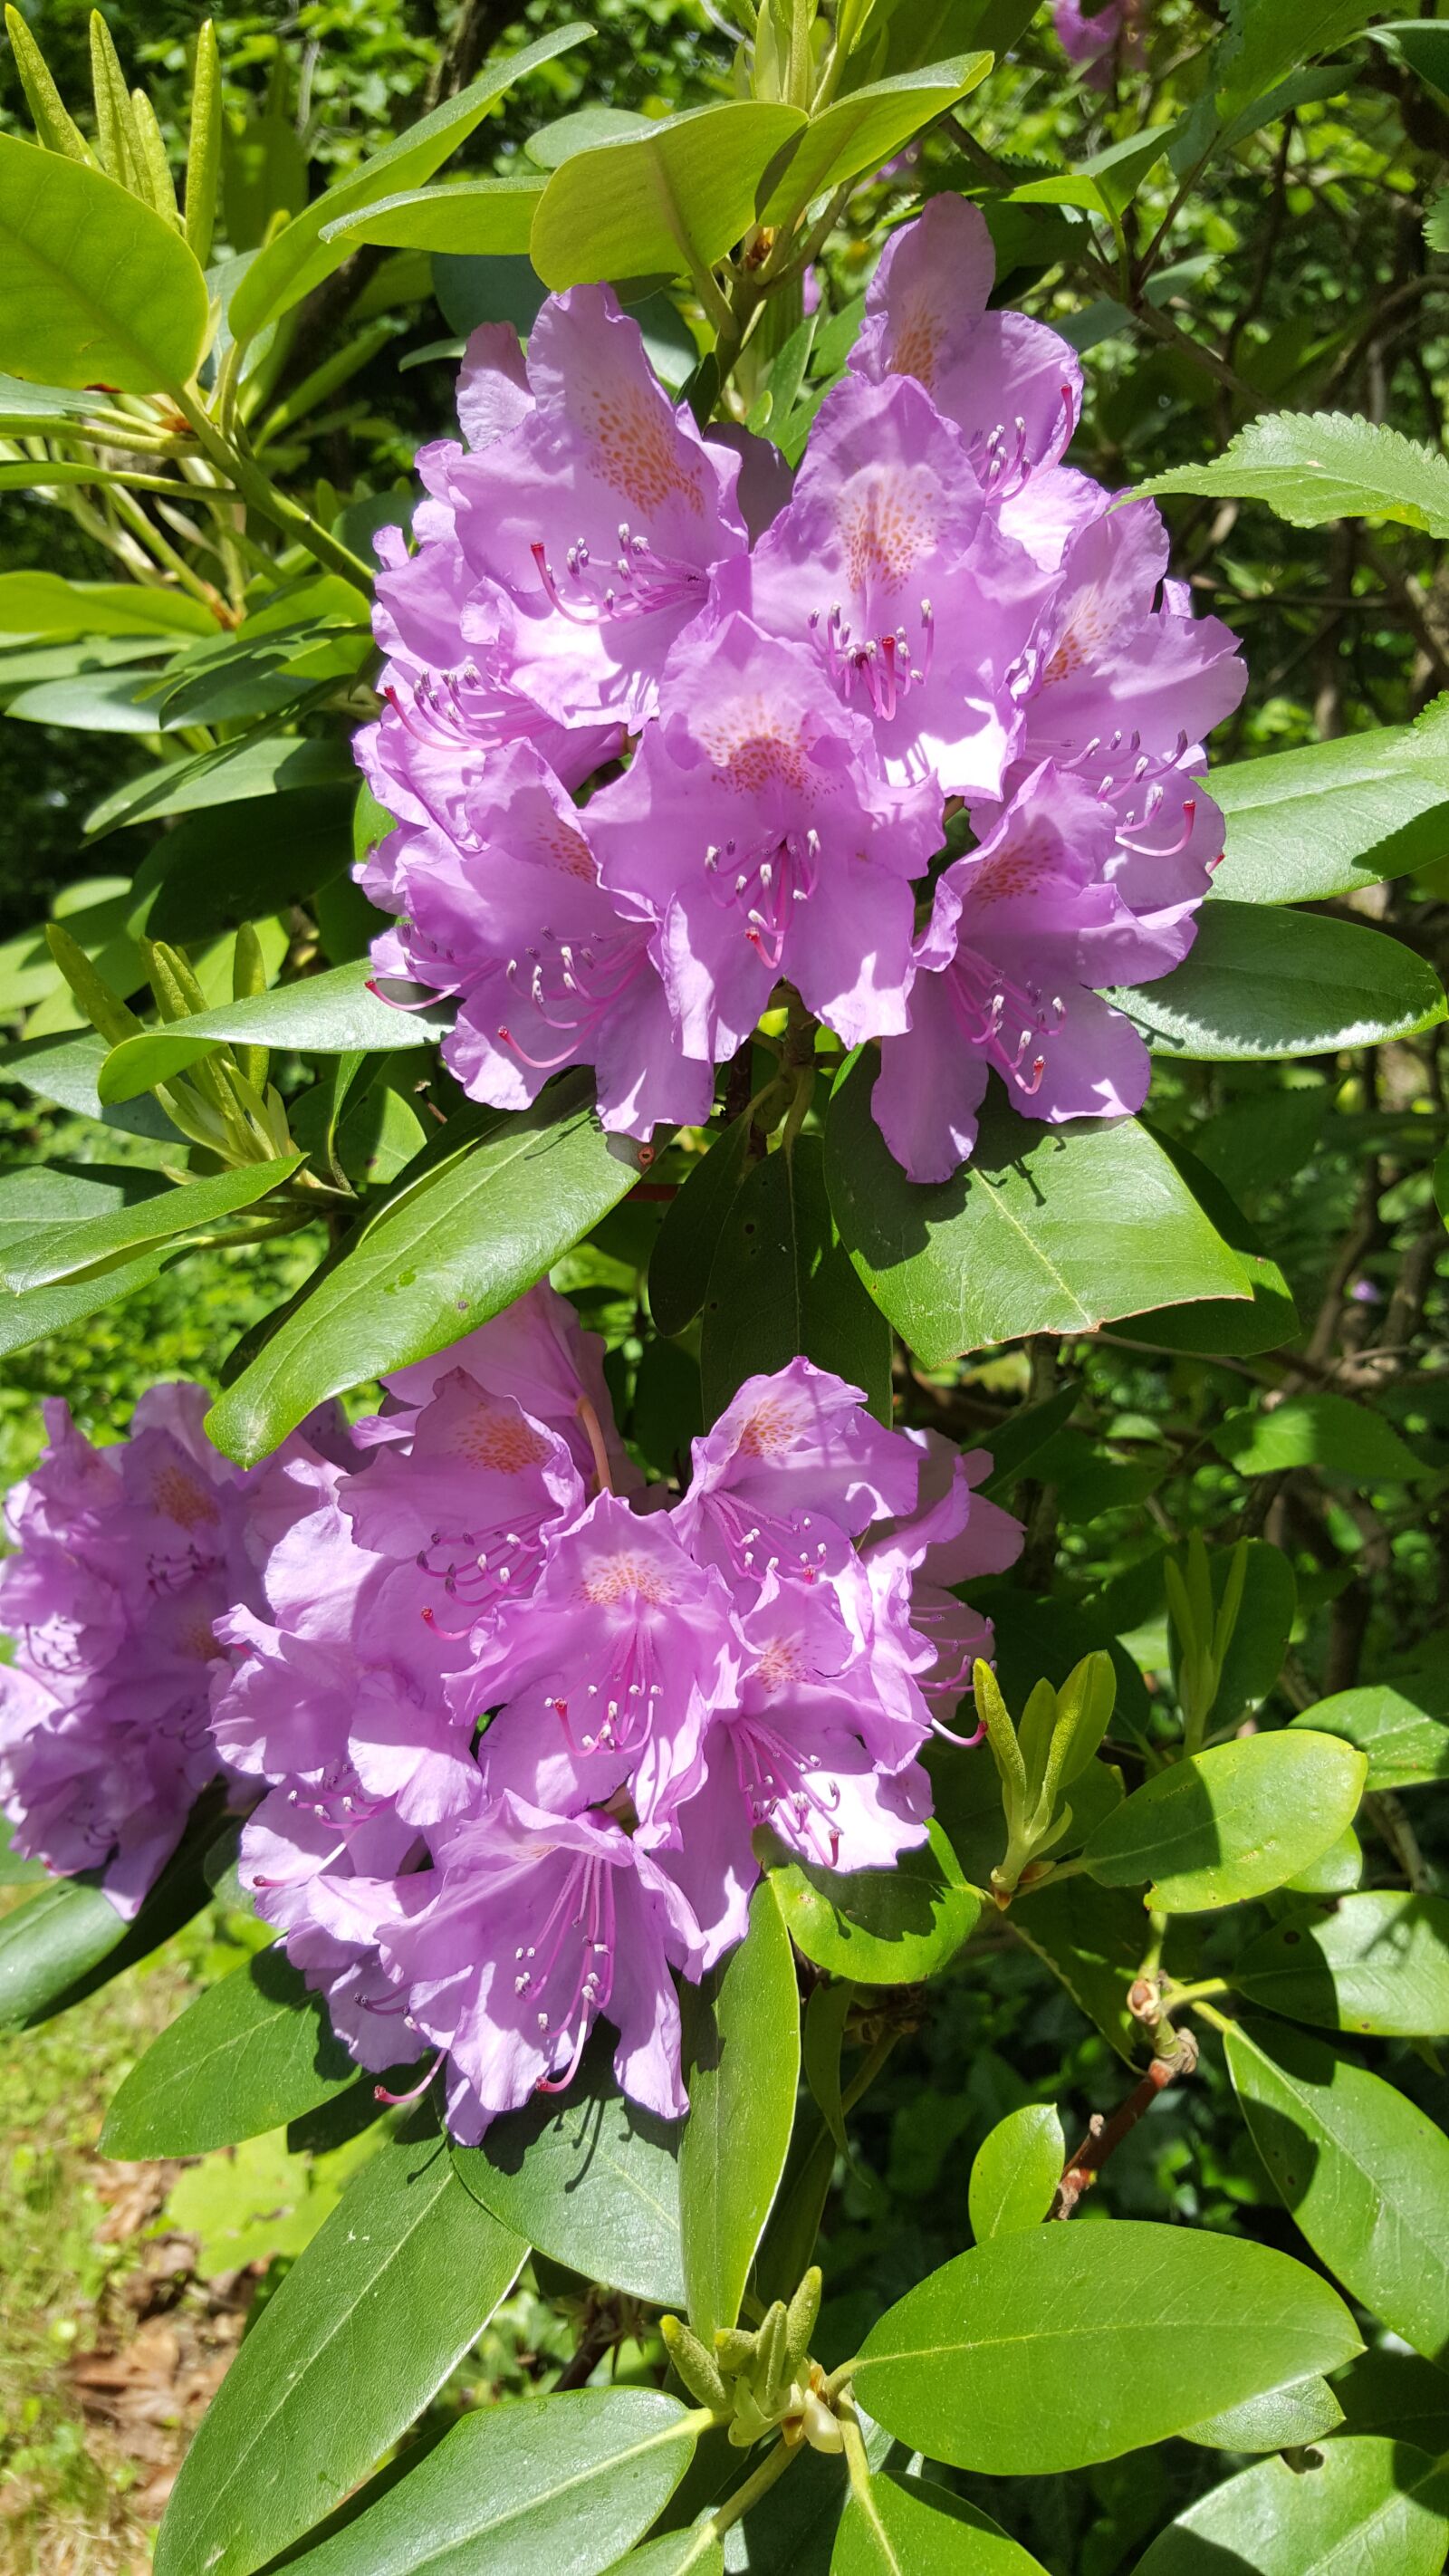 Samsung Galaxy S6 sample photo. Rhododendron, blossom, bloom photography